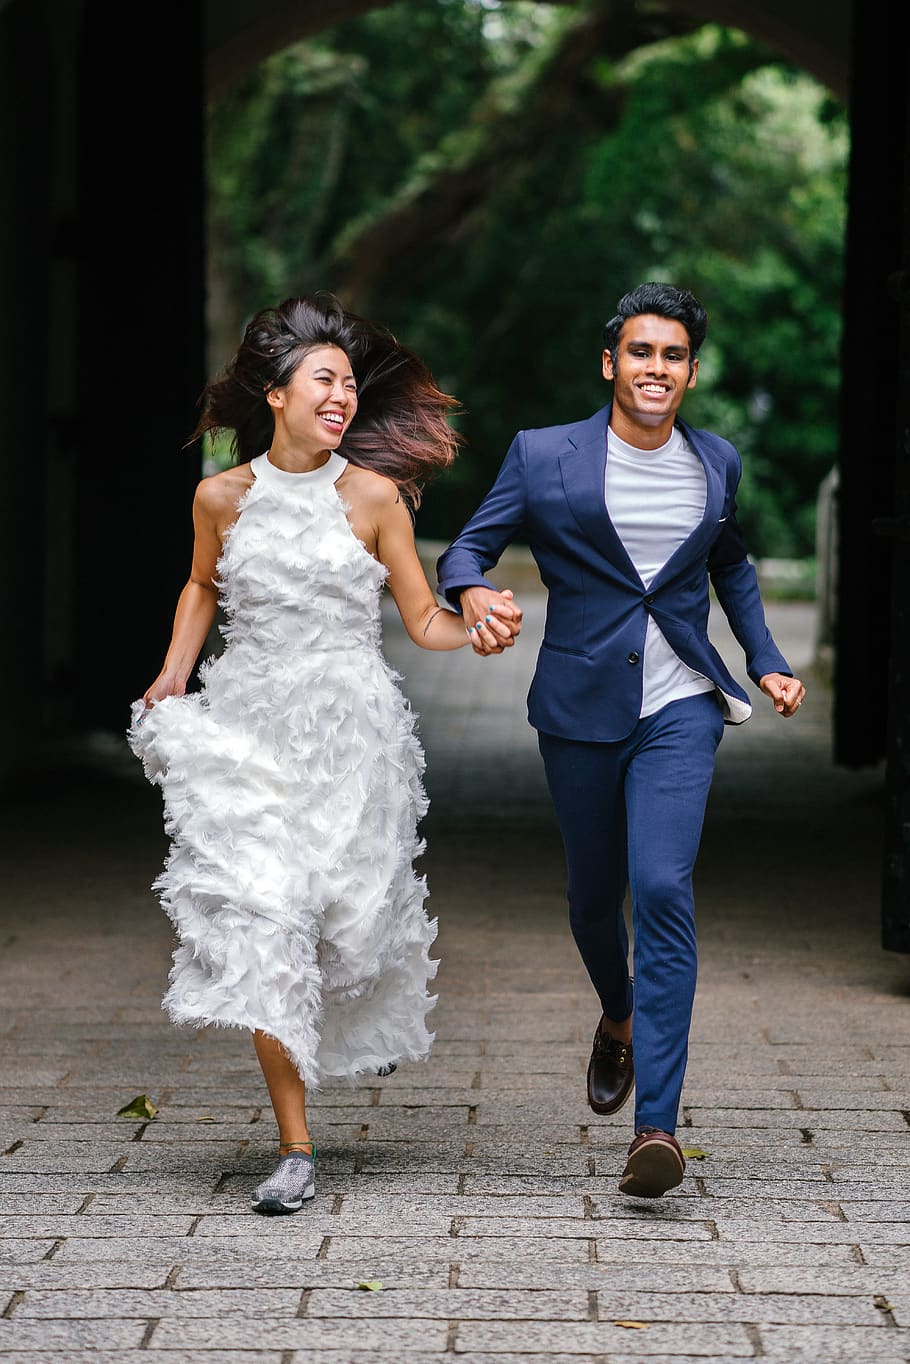 Bride and Groom Running on Concrete Pathway, Asian, Chinese, couple, HD wallpaper